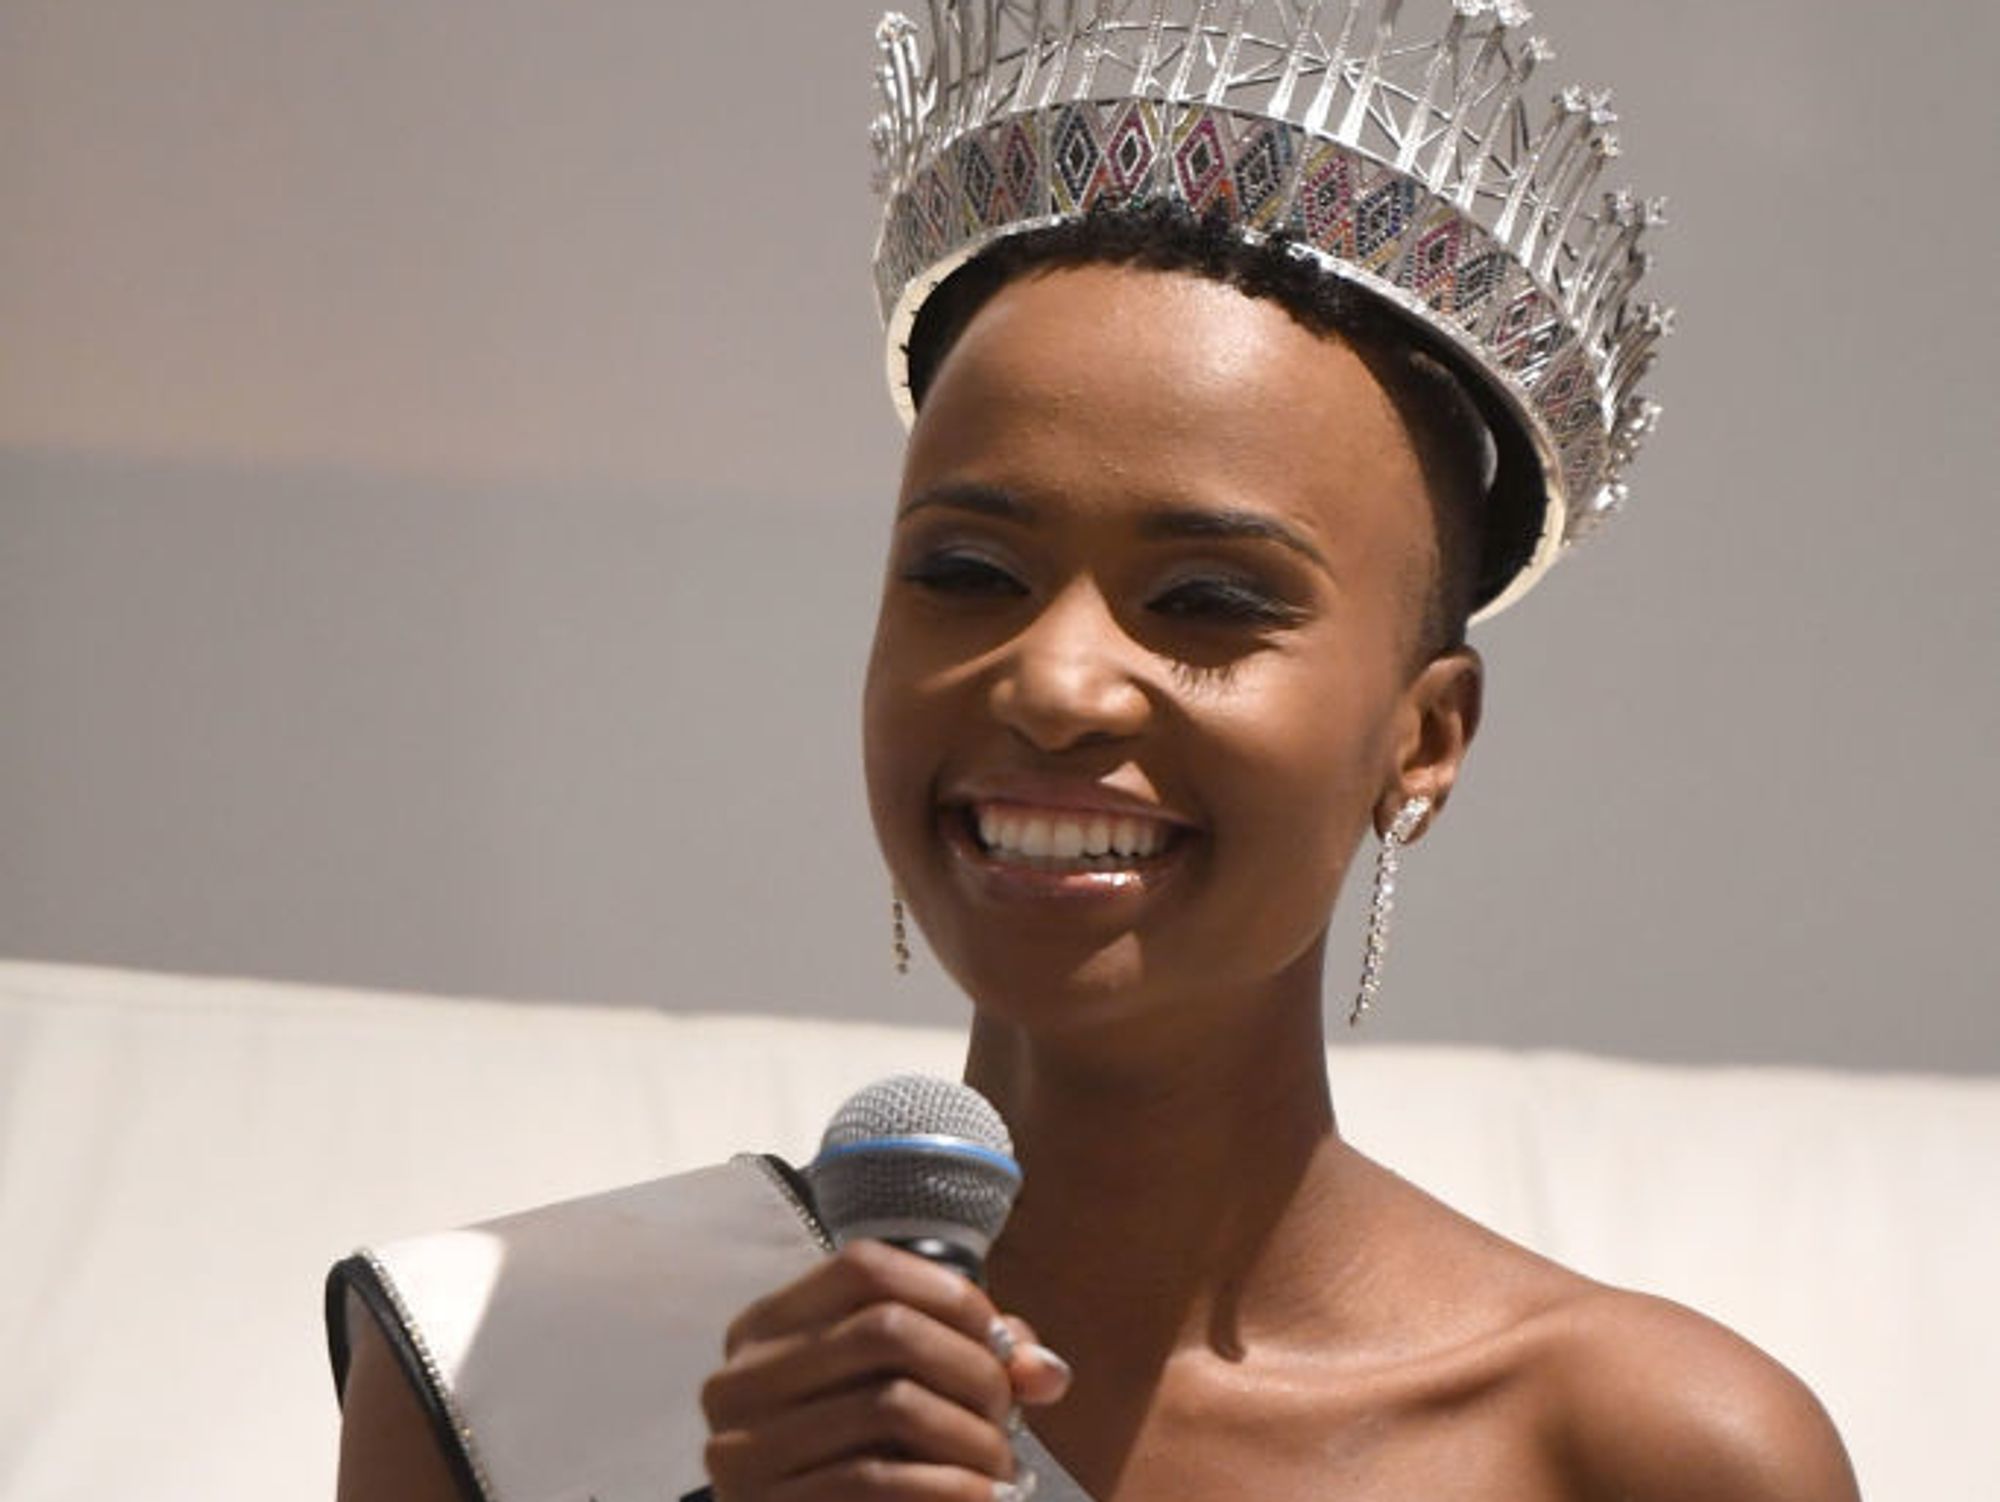 Miss South Africa Wants Men to Write Love Letters to Women to Fight Against Gender-Based Violence